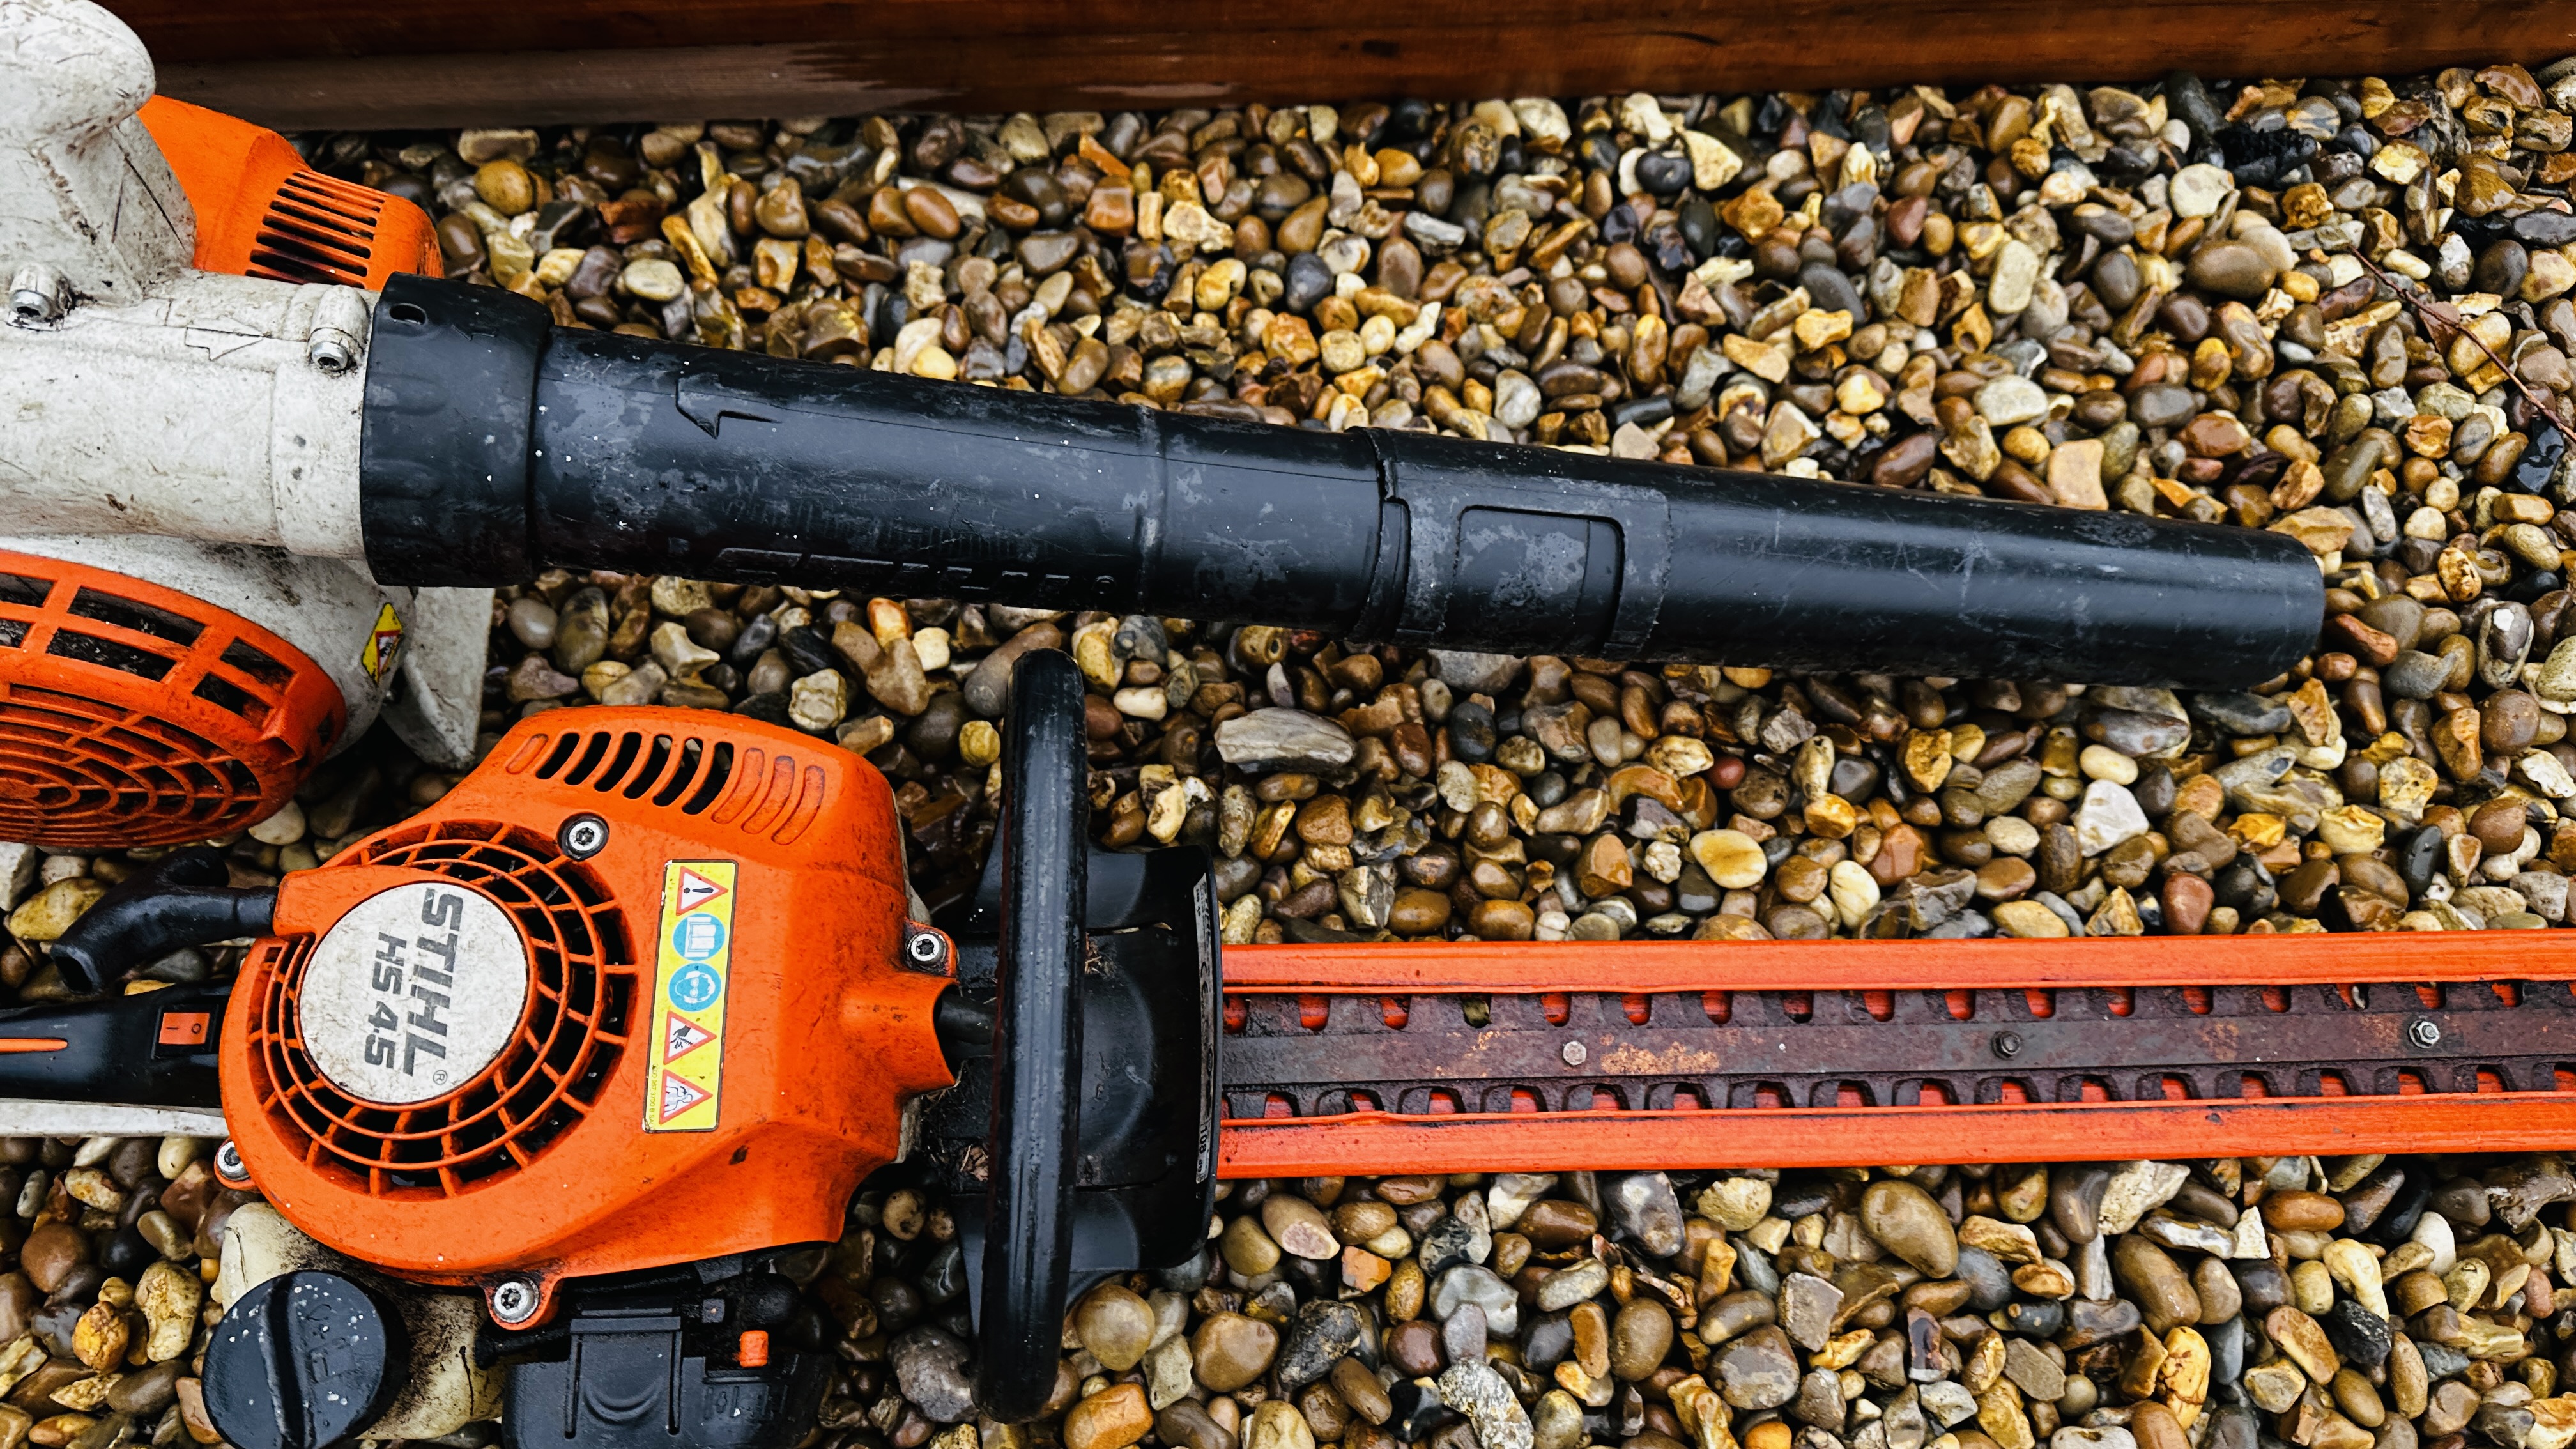 STIHL PETROL DRIVEN GARDEN BLOWER AND STIHL HS45 PETROL DRIVEN HEDGE TRIMMER - AS CLEARED, - Image 6 of 8